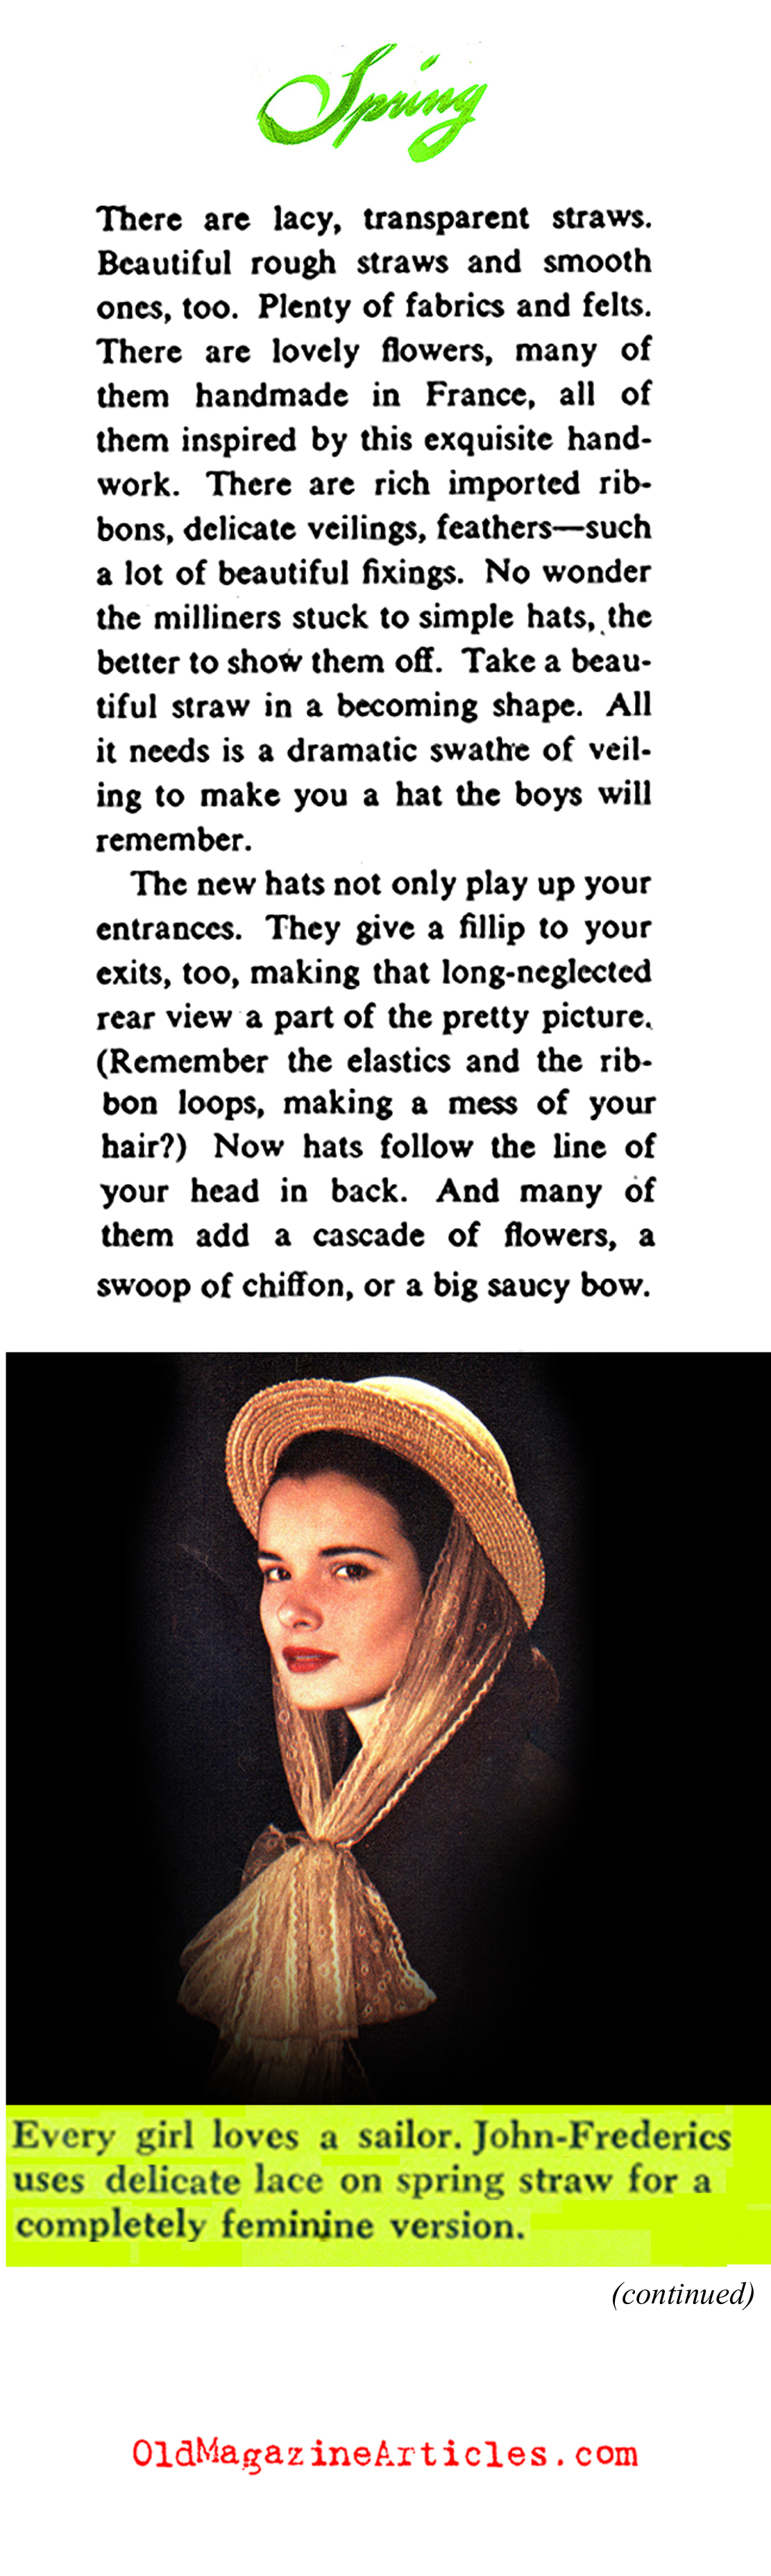 The Hats of 1947 (Collier's Magazine, 1947)